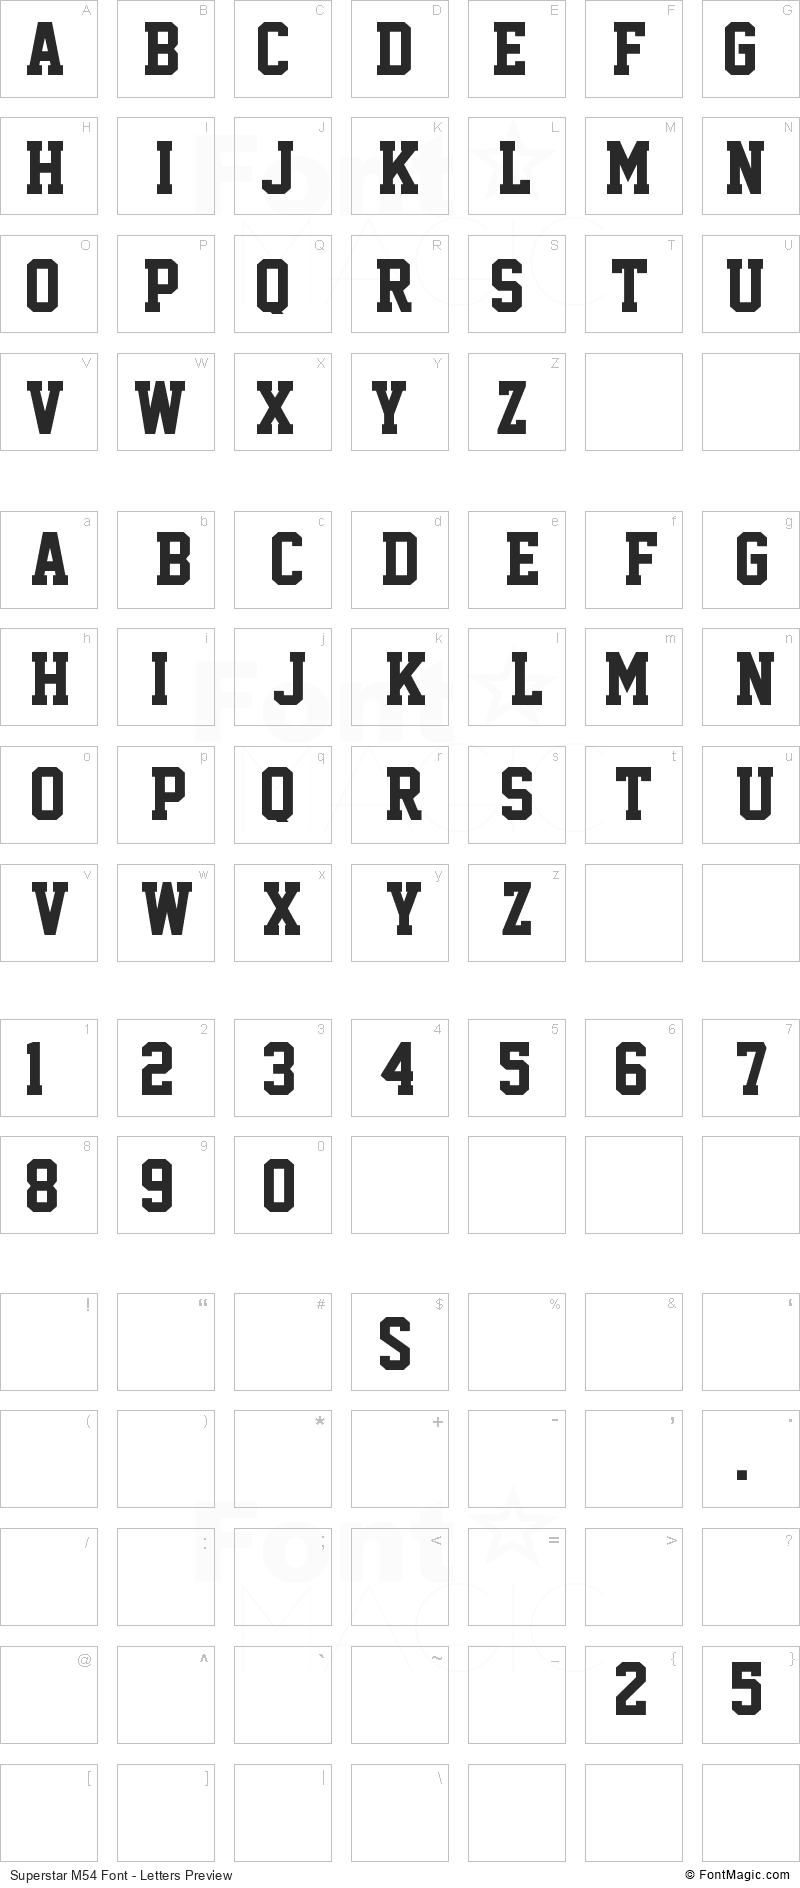 Superstar M54 Font - All Latters Preview Chart